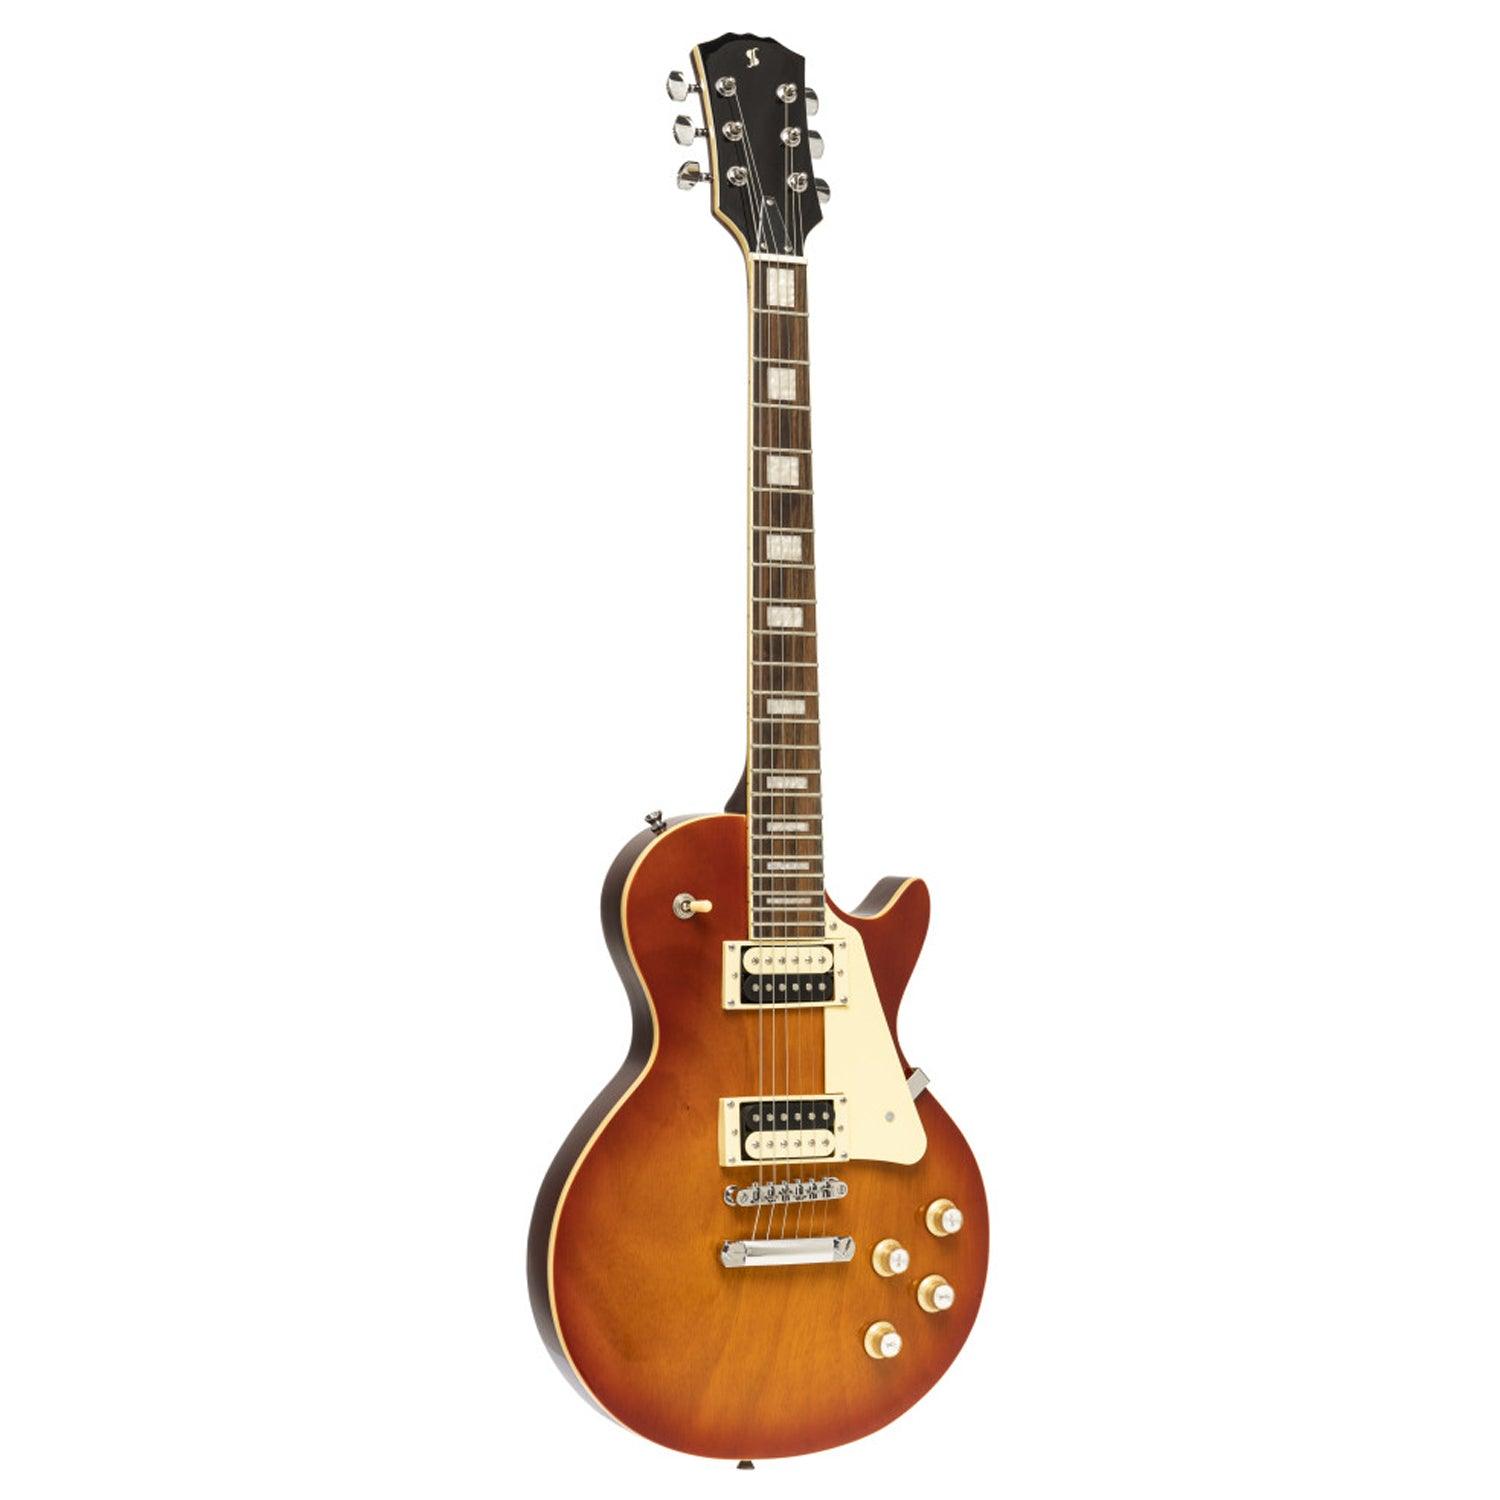 Stagg SEL-STD VSB Standard Series Electric Guitar with solid Mahogany body archtop - DY Pro Audio